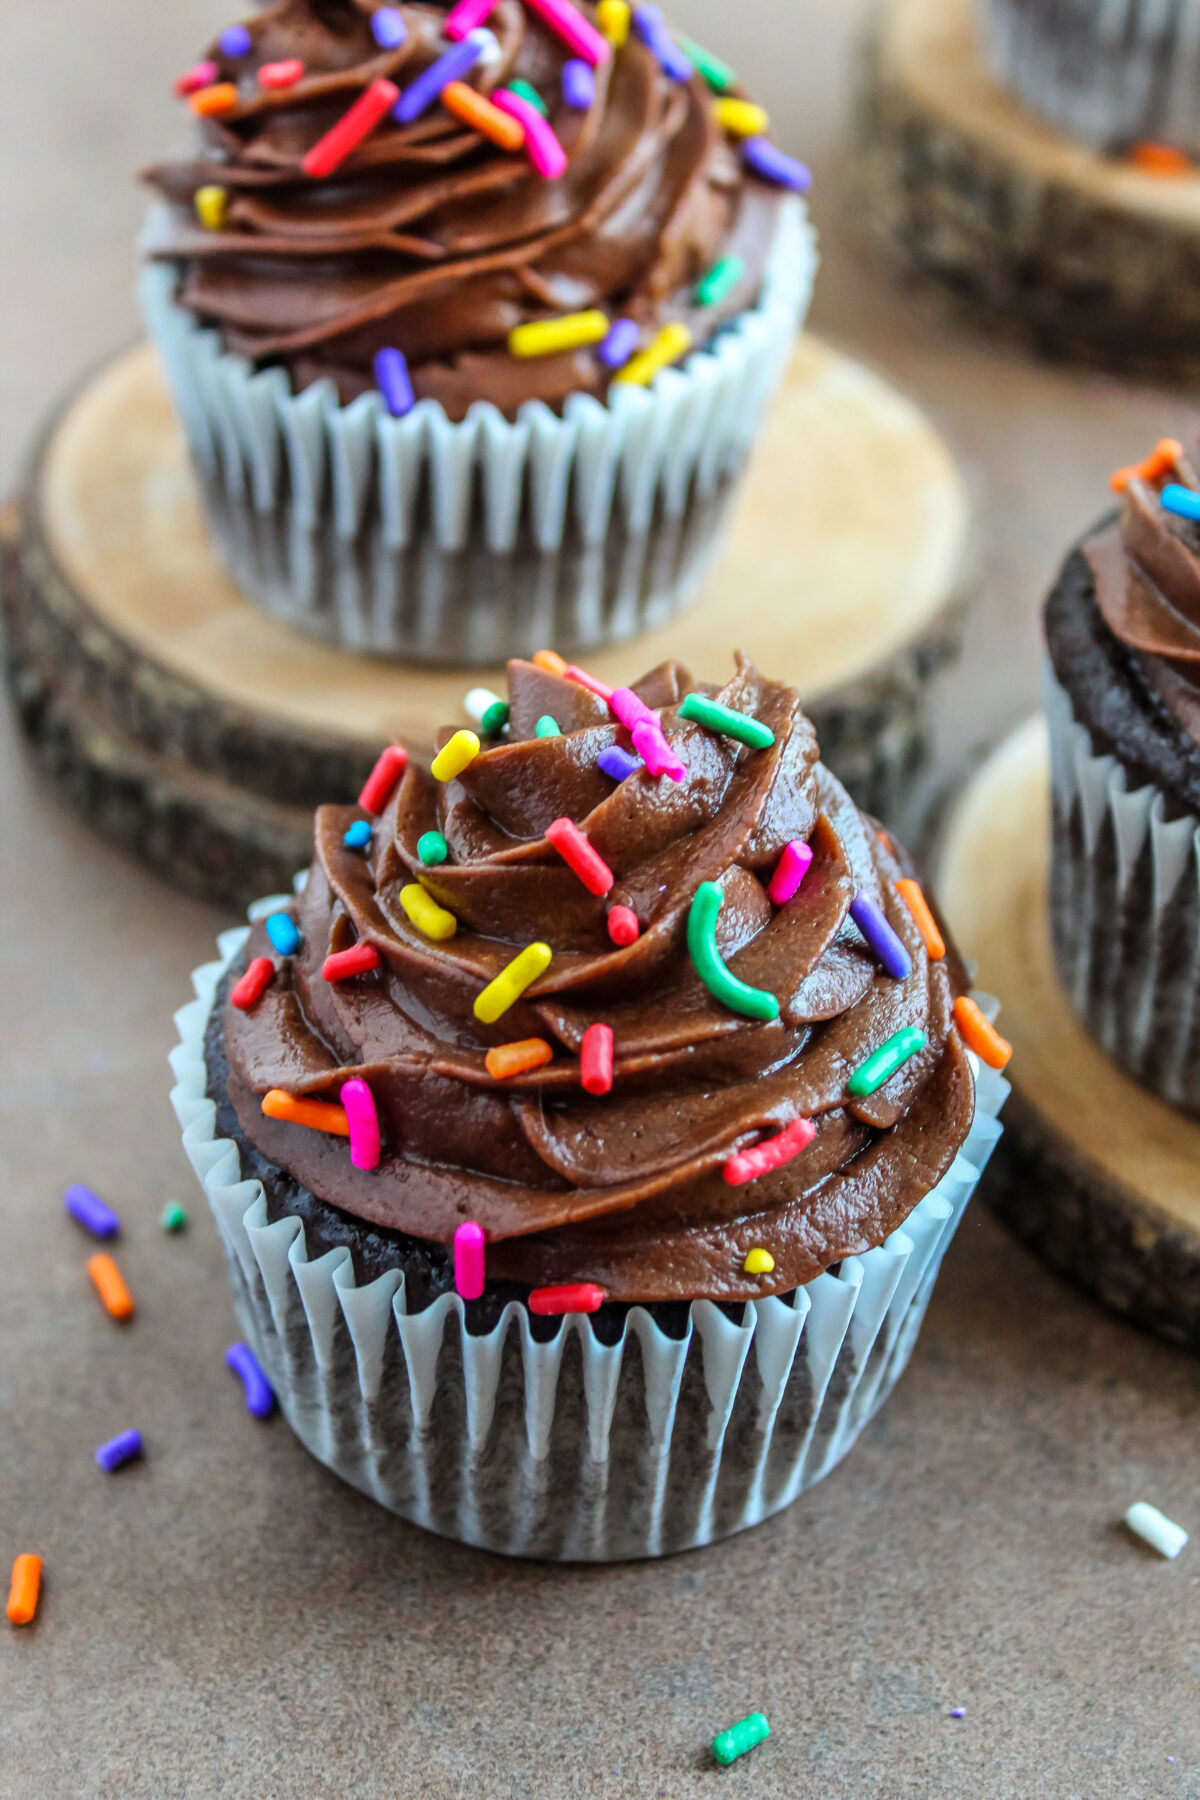 If you are looking for chocolate cupcakes that everyone will rave about, this recipe offers rich chocolate flavor and moist, tender cake!